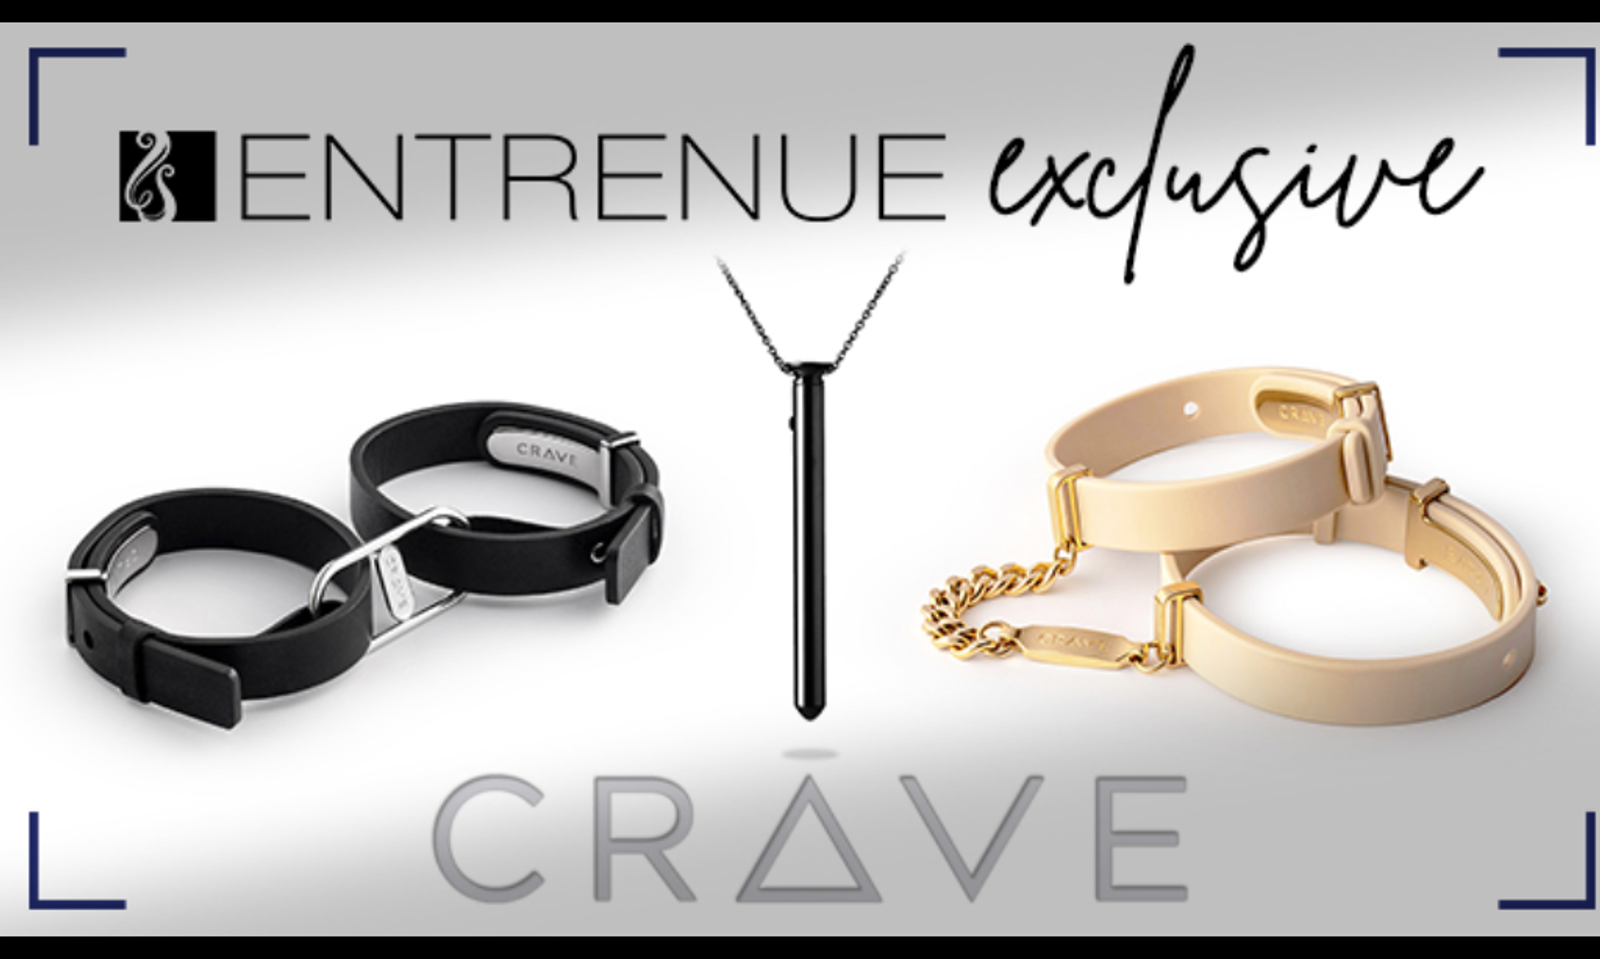 Entrenue to Exclusively Distribute Crave Products in the U.S.